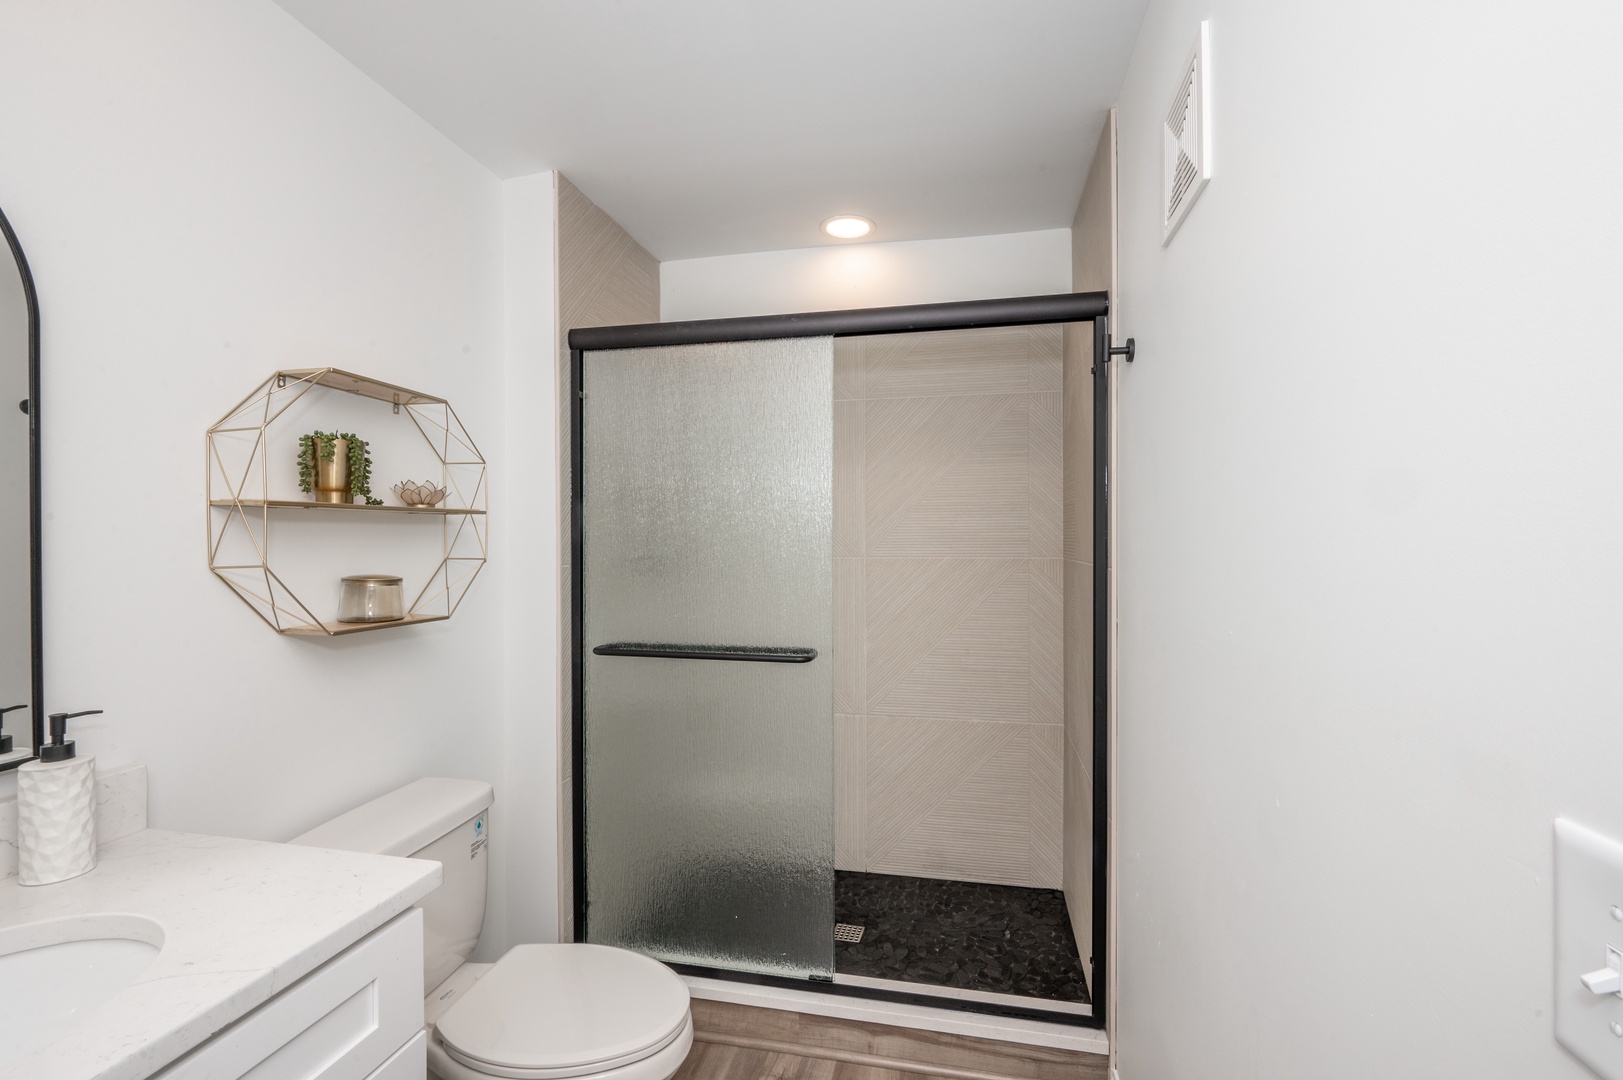 The chic bathroom offers a single vanity and spa-like glass shower